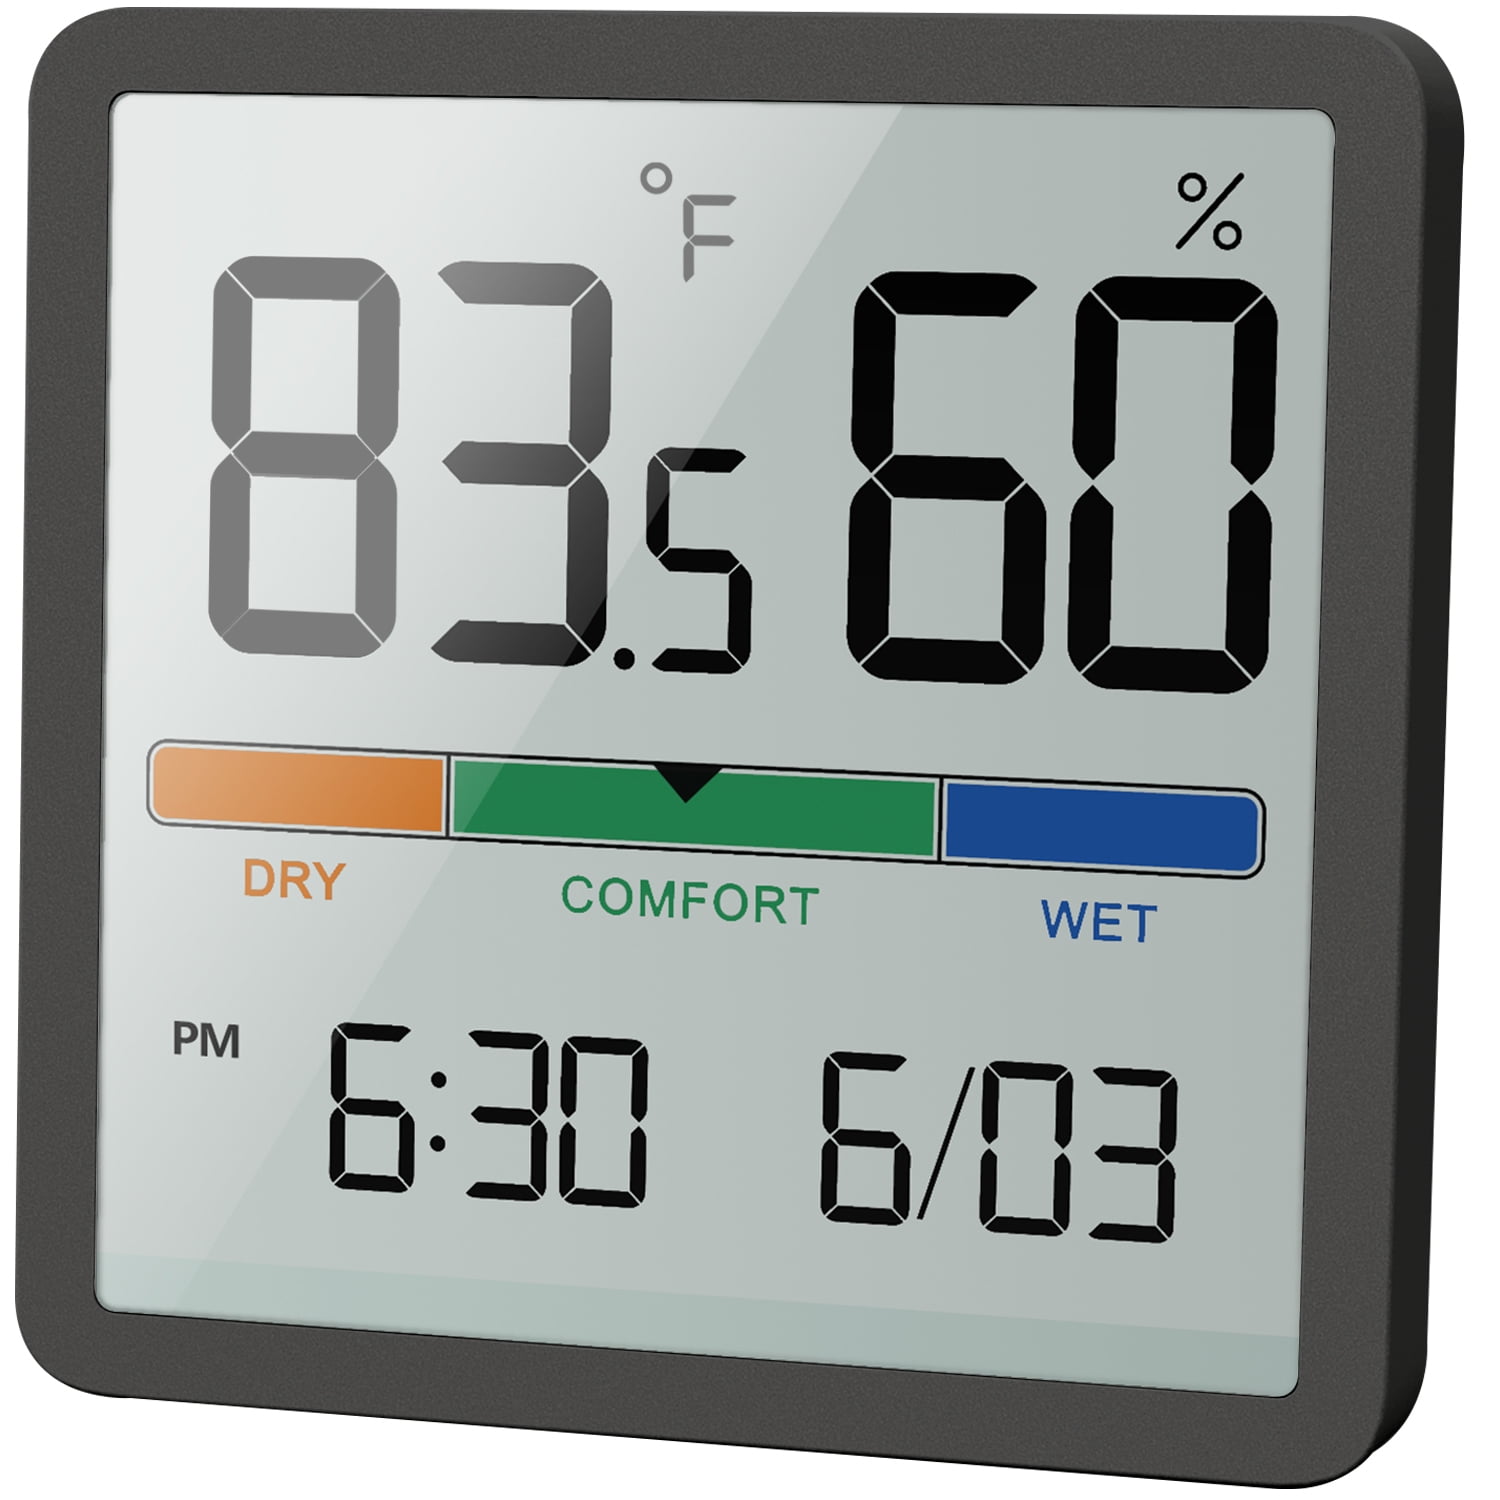 VOCOO Humidity Gauge Indoor Thermometer - Digital Indoor Humidity Sensor  Room Thermometer with Time Date Display, Accurate Hygrometer Temp Meter for Home  Greenhouse Wine Cellar Black 